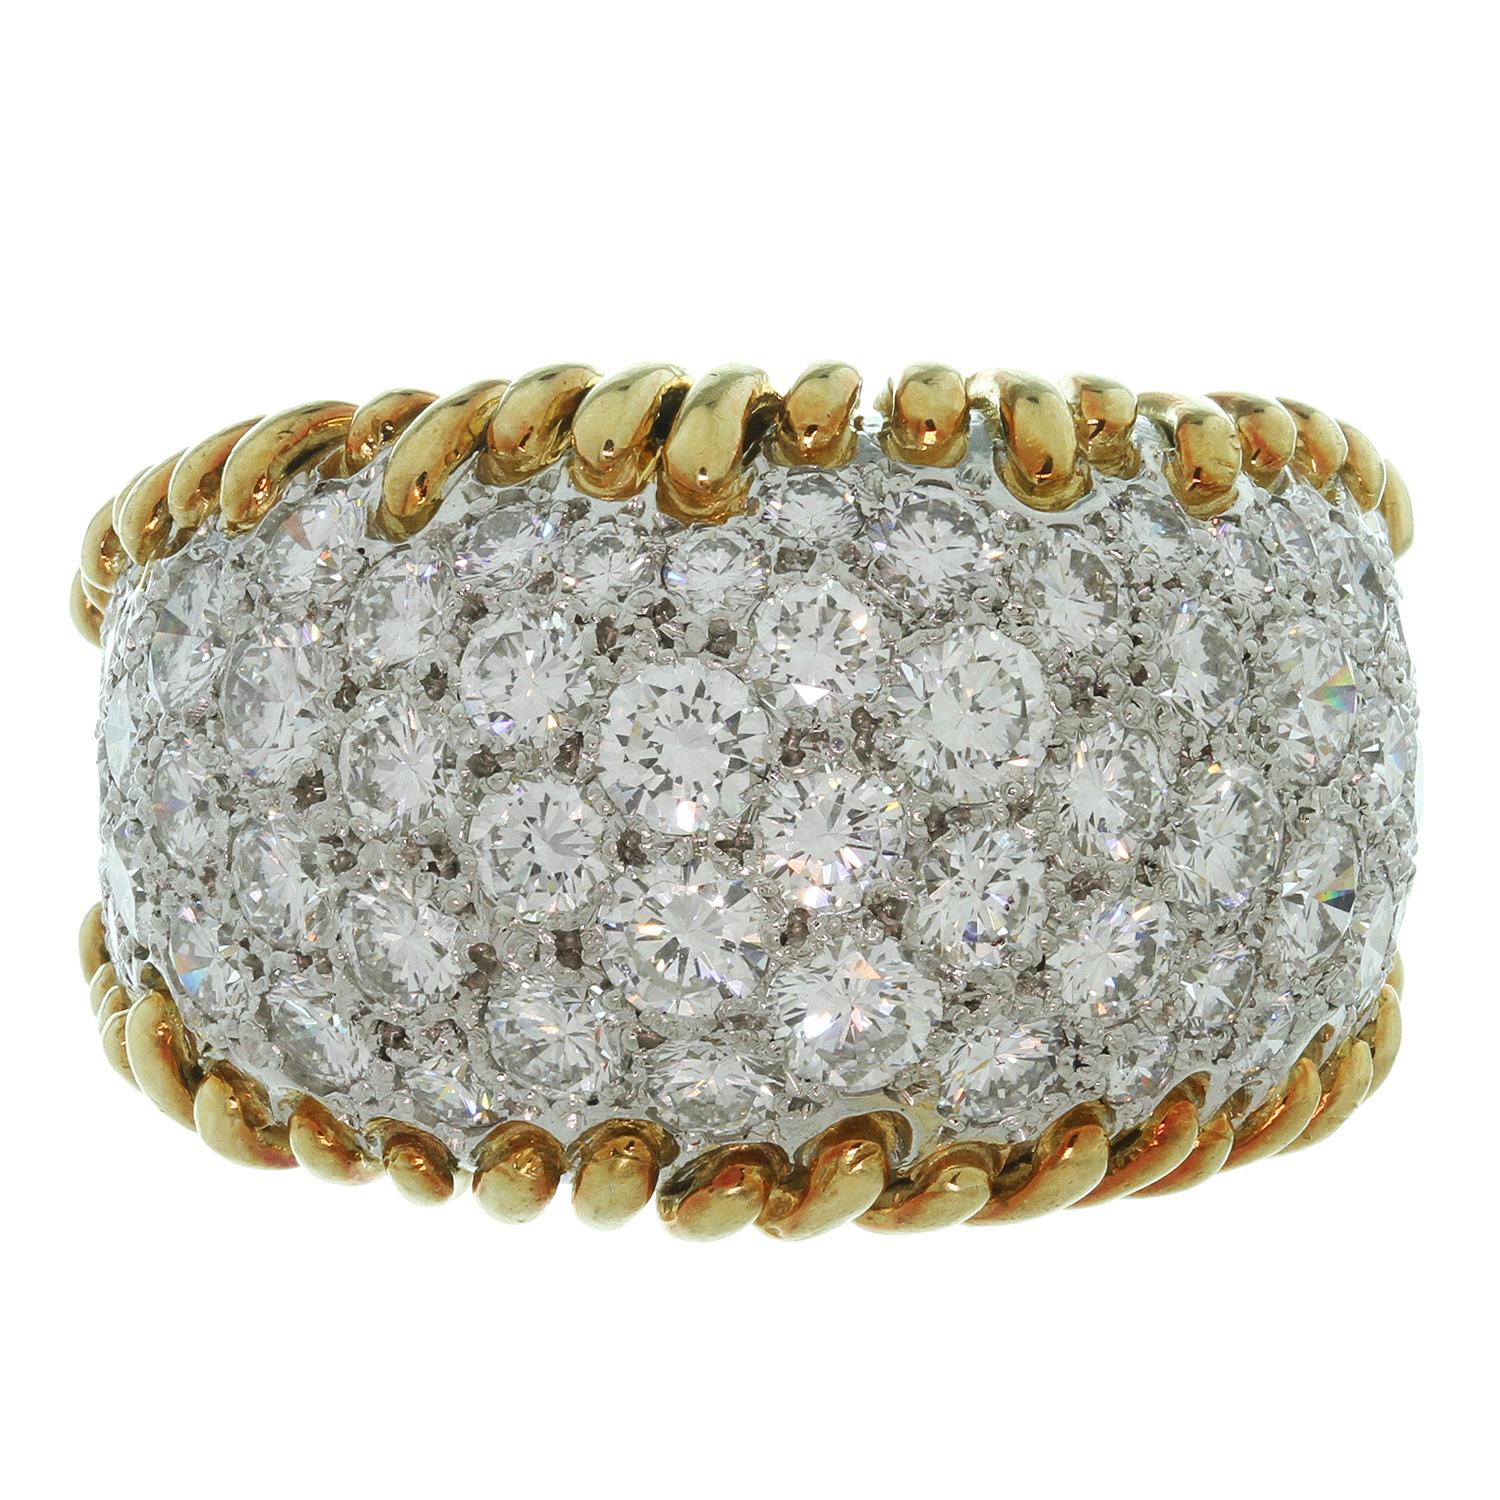 This glamorous vintage ring designed was by Schlumberger for Tiffany & Co. is crafted in 18k yellow gold and set all around with very fine quality round brilliant F-G VVS1-VVS2 diamonds weighing an estimated 4.0 - 4.25 carats. The ring size